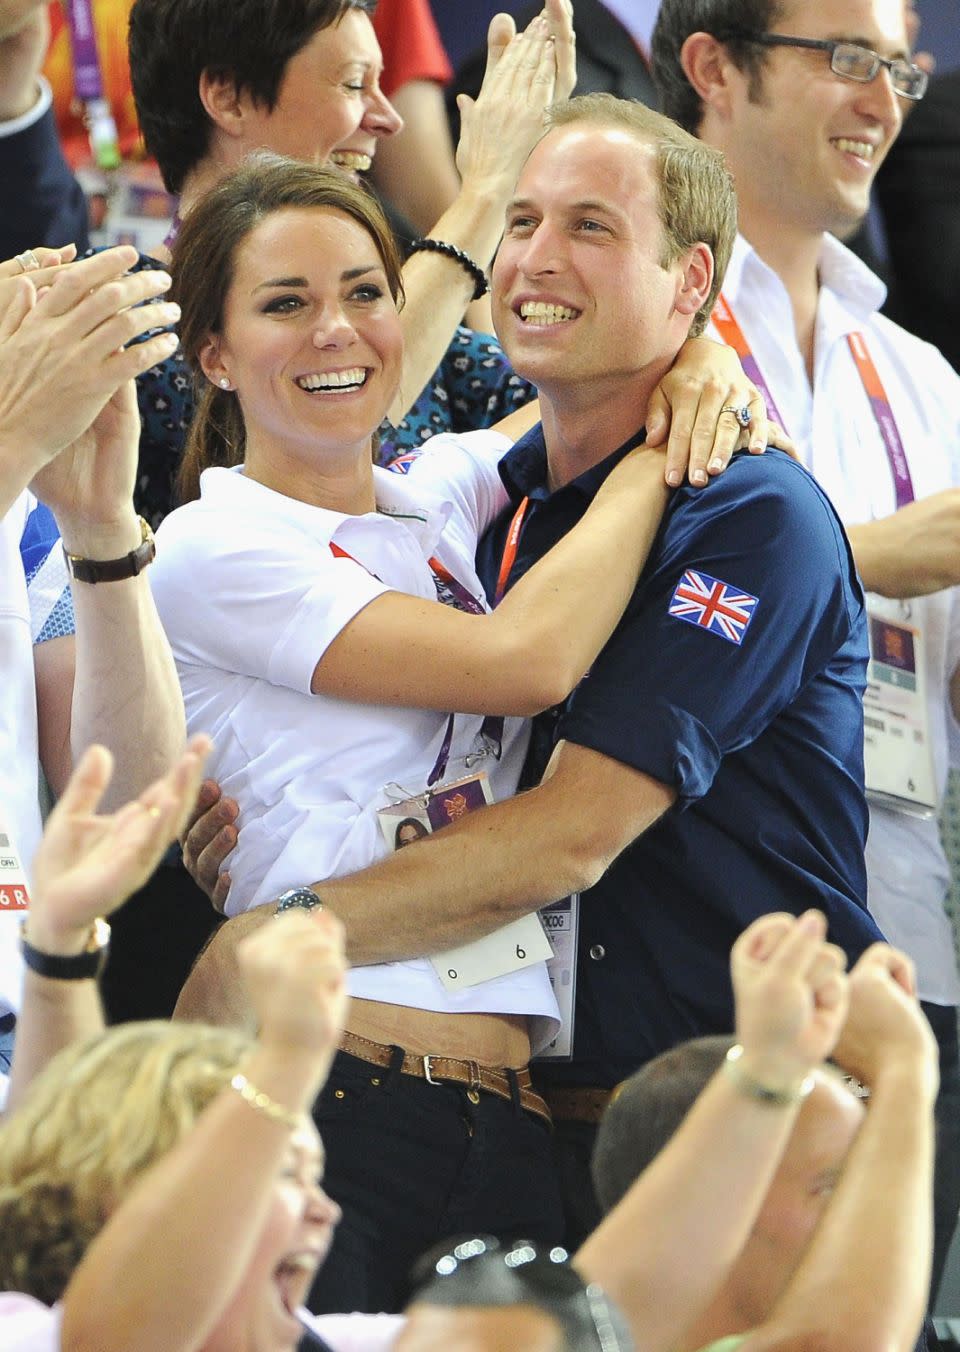 While Prince William's place in line to the throne technically mean he's not supposed to show PDA with his wife, Kate Middleton. Photo: Getty Images